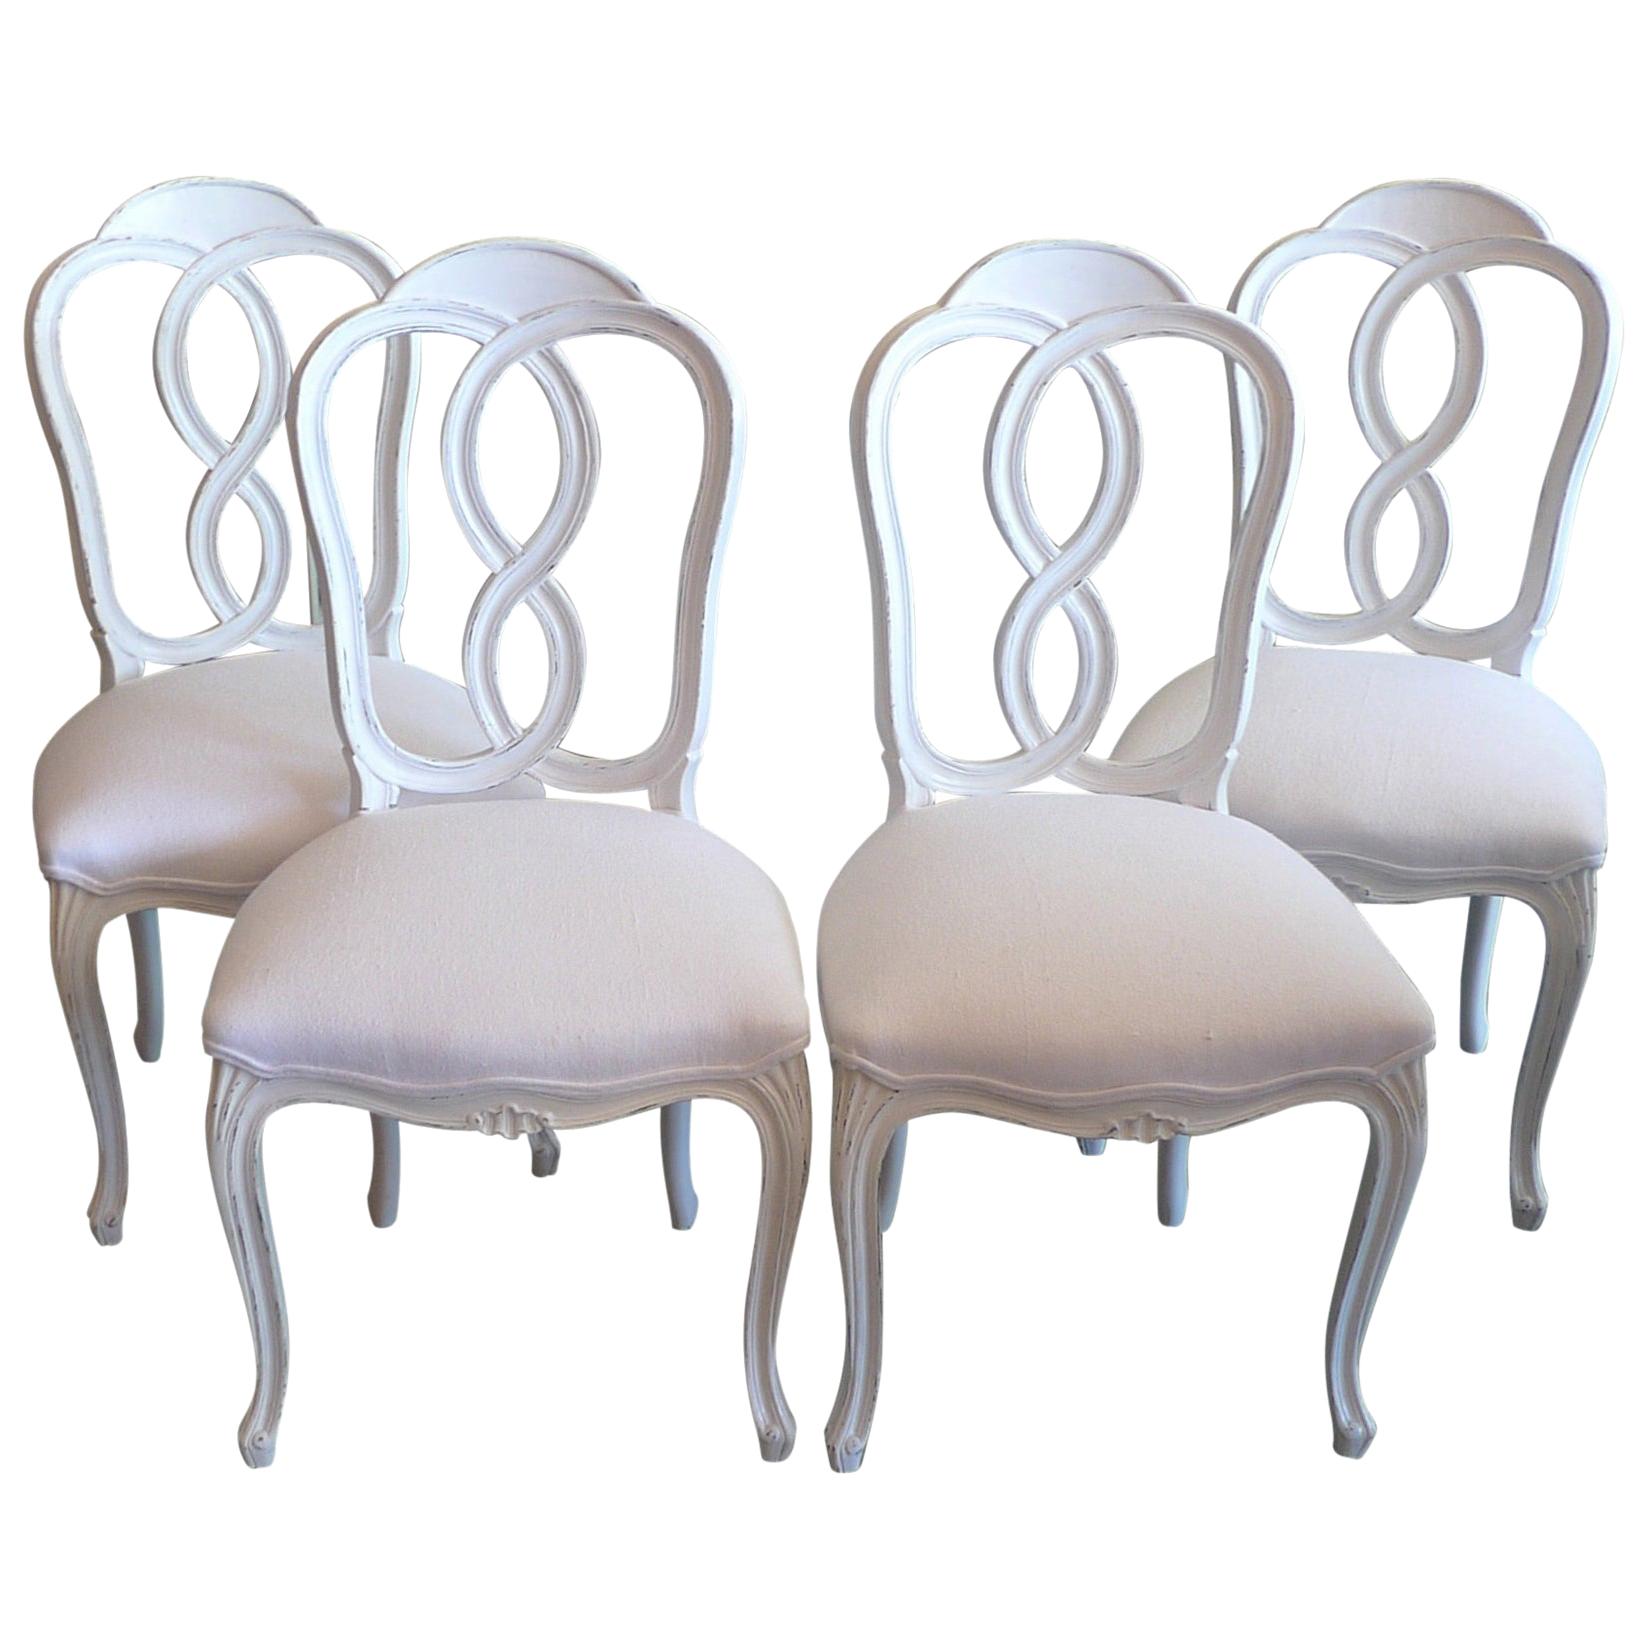 4 French Louis XV Style Painted Dining Chairs Reupholstered with Vintage Fabric